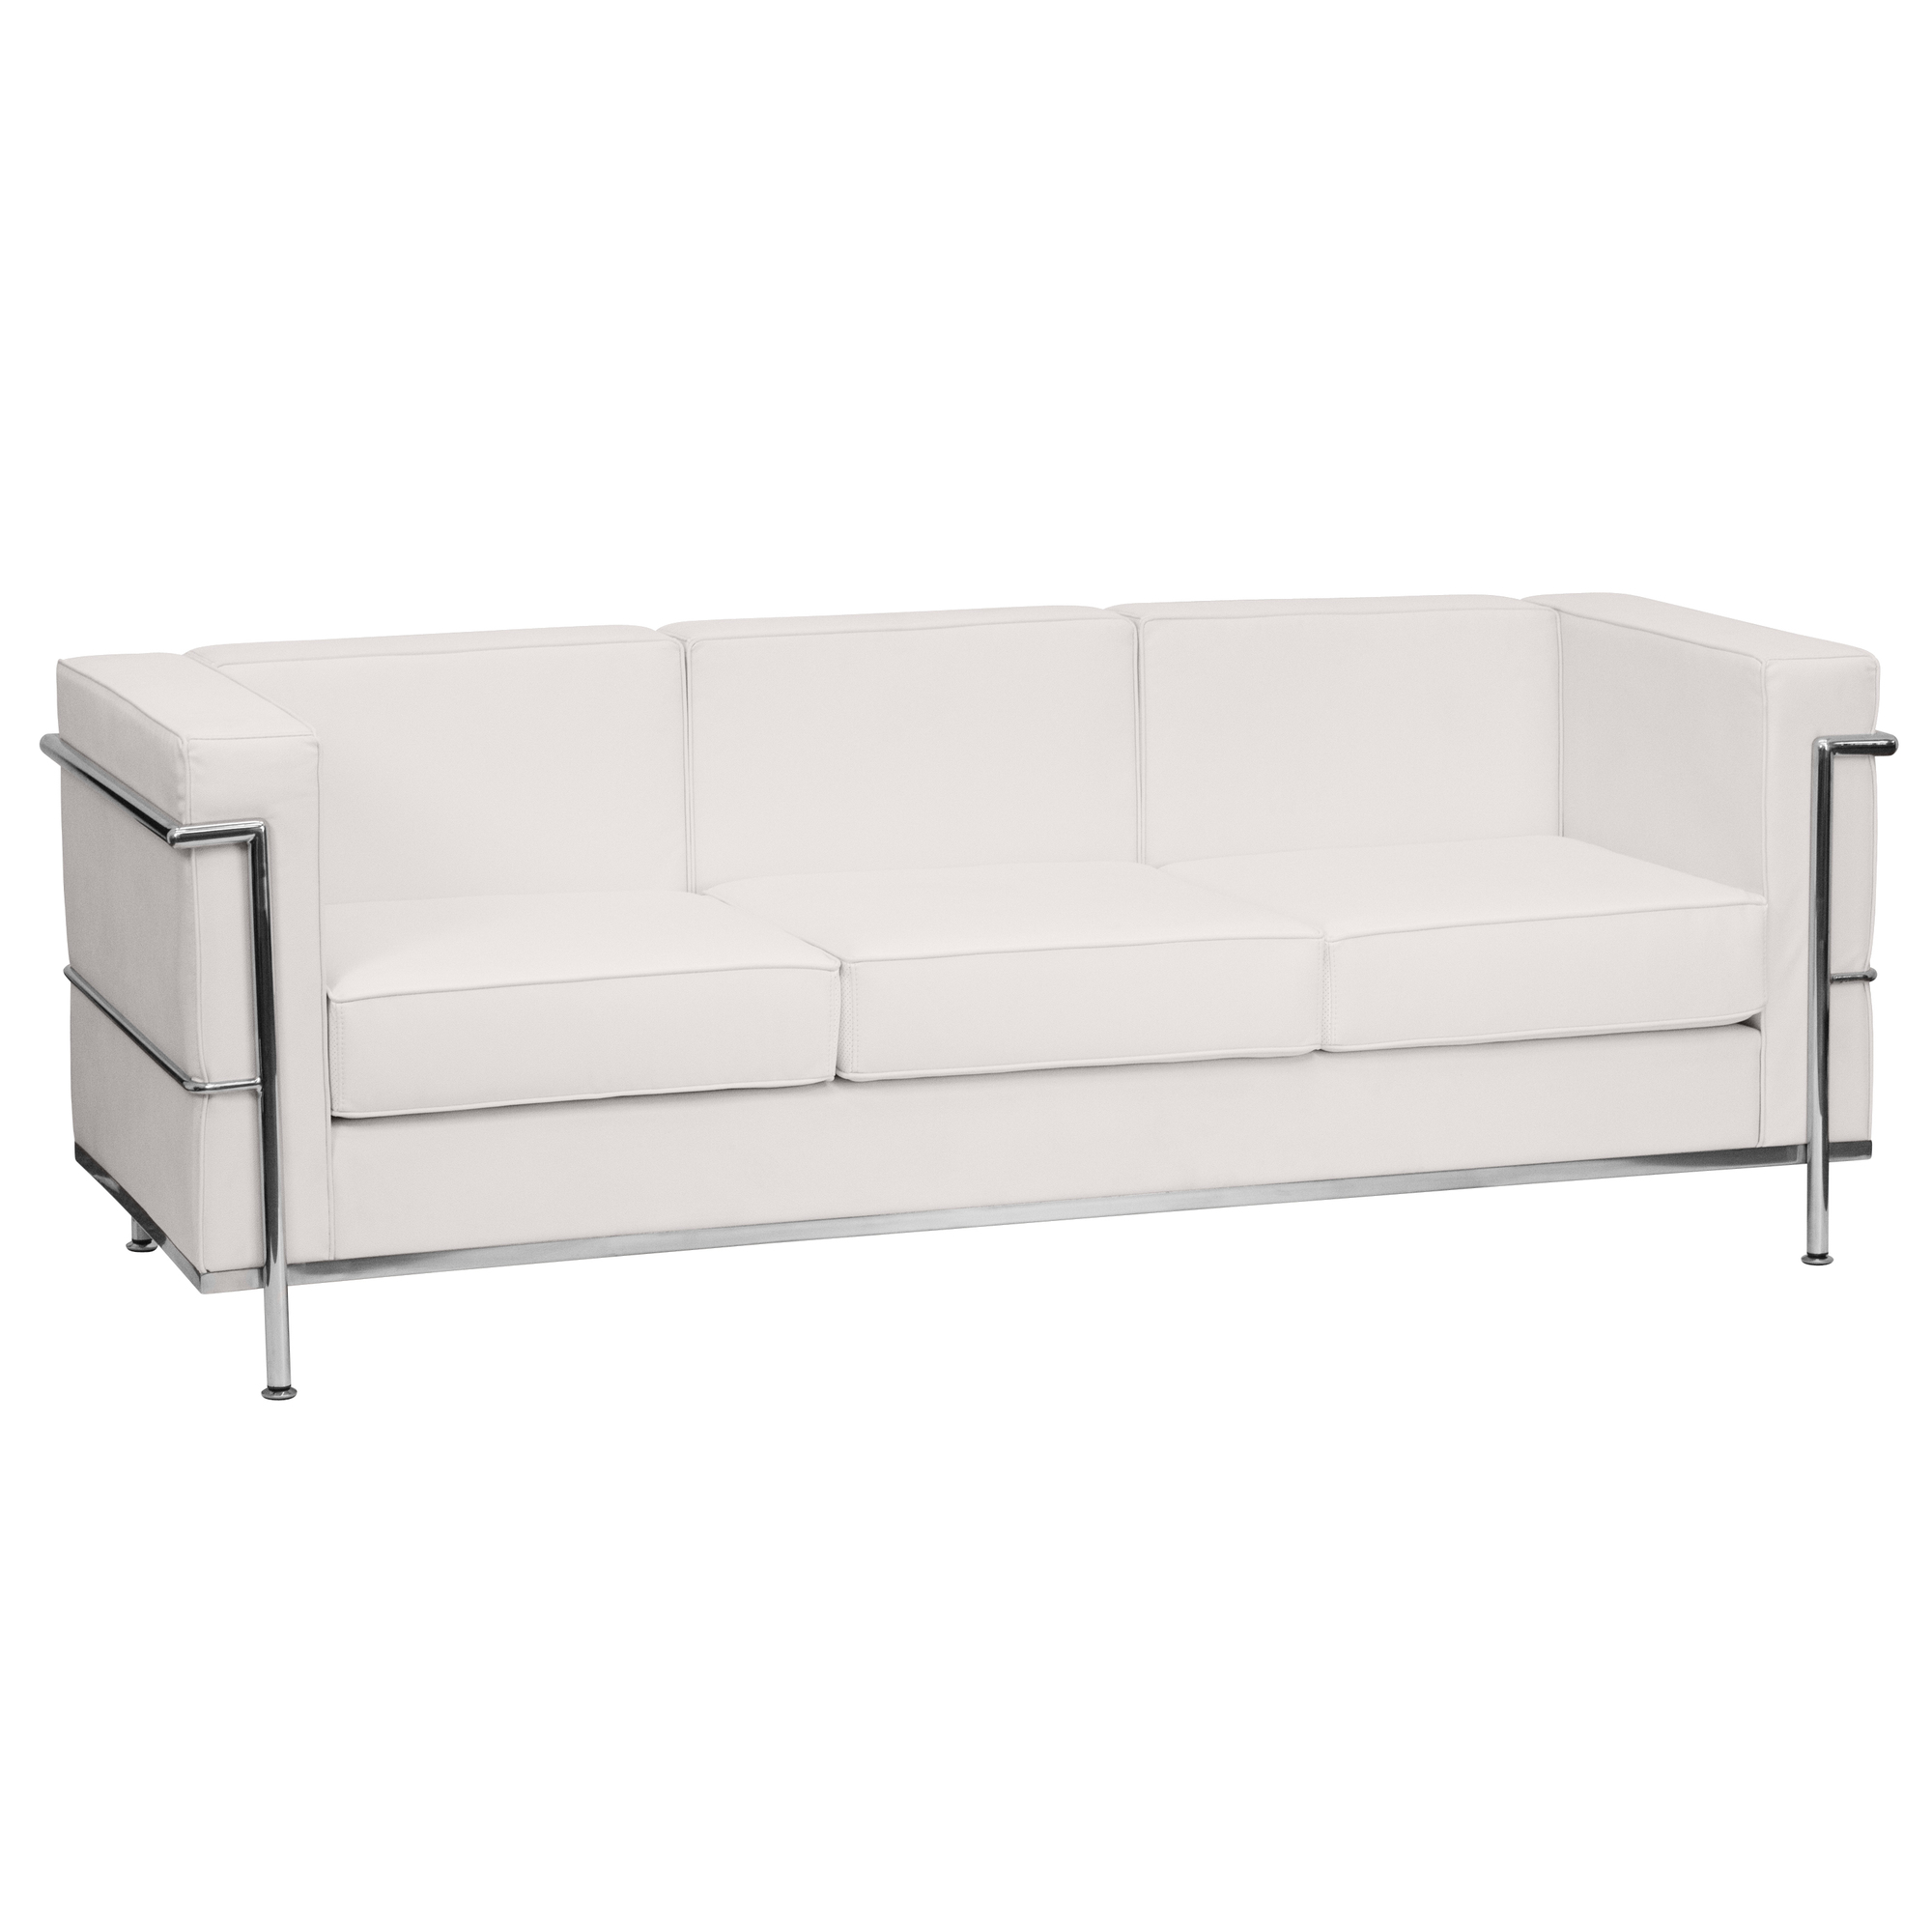 Flash Furniture, White LeatherSoft Sofa with Double Bar Frame, Primary Color White, Included (qty.) 1, Model ZBREG8103SOFWH